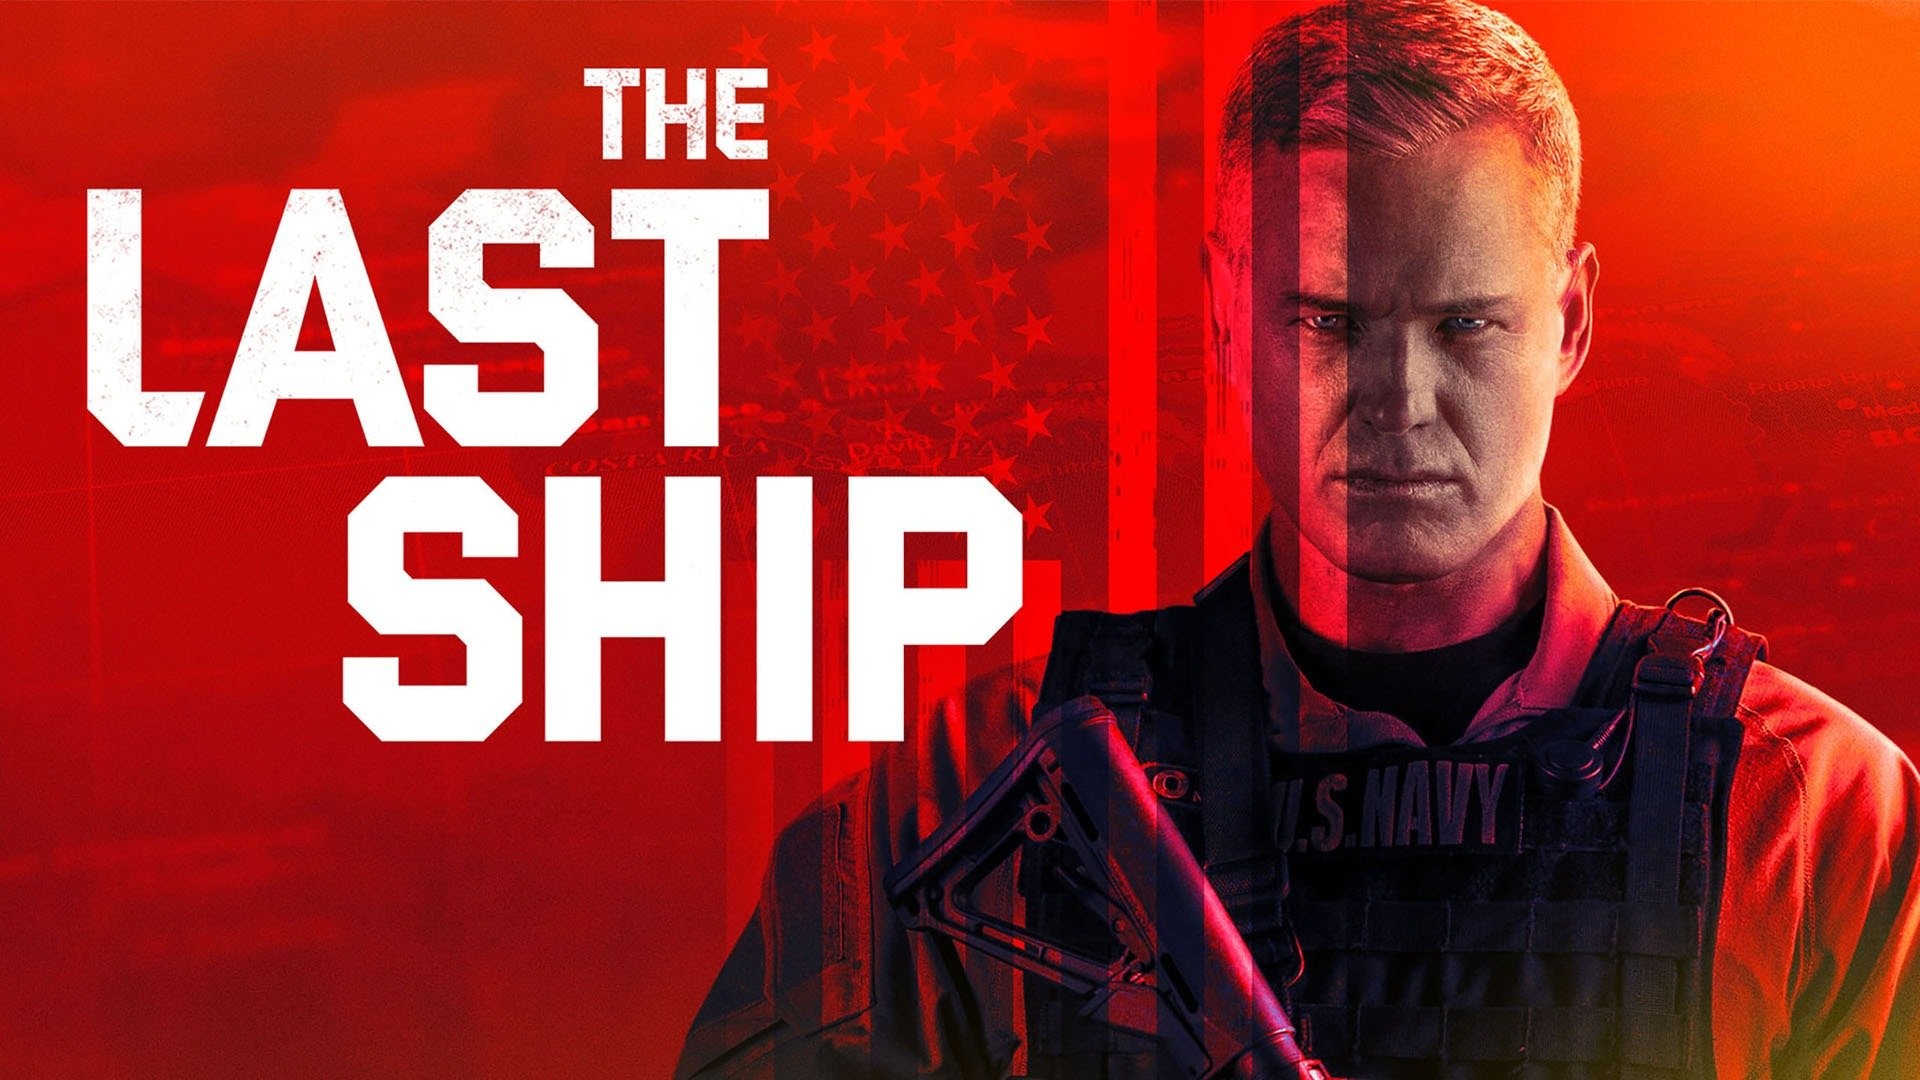 The Last Ship - Commitment - Review - We Have the Watch